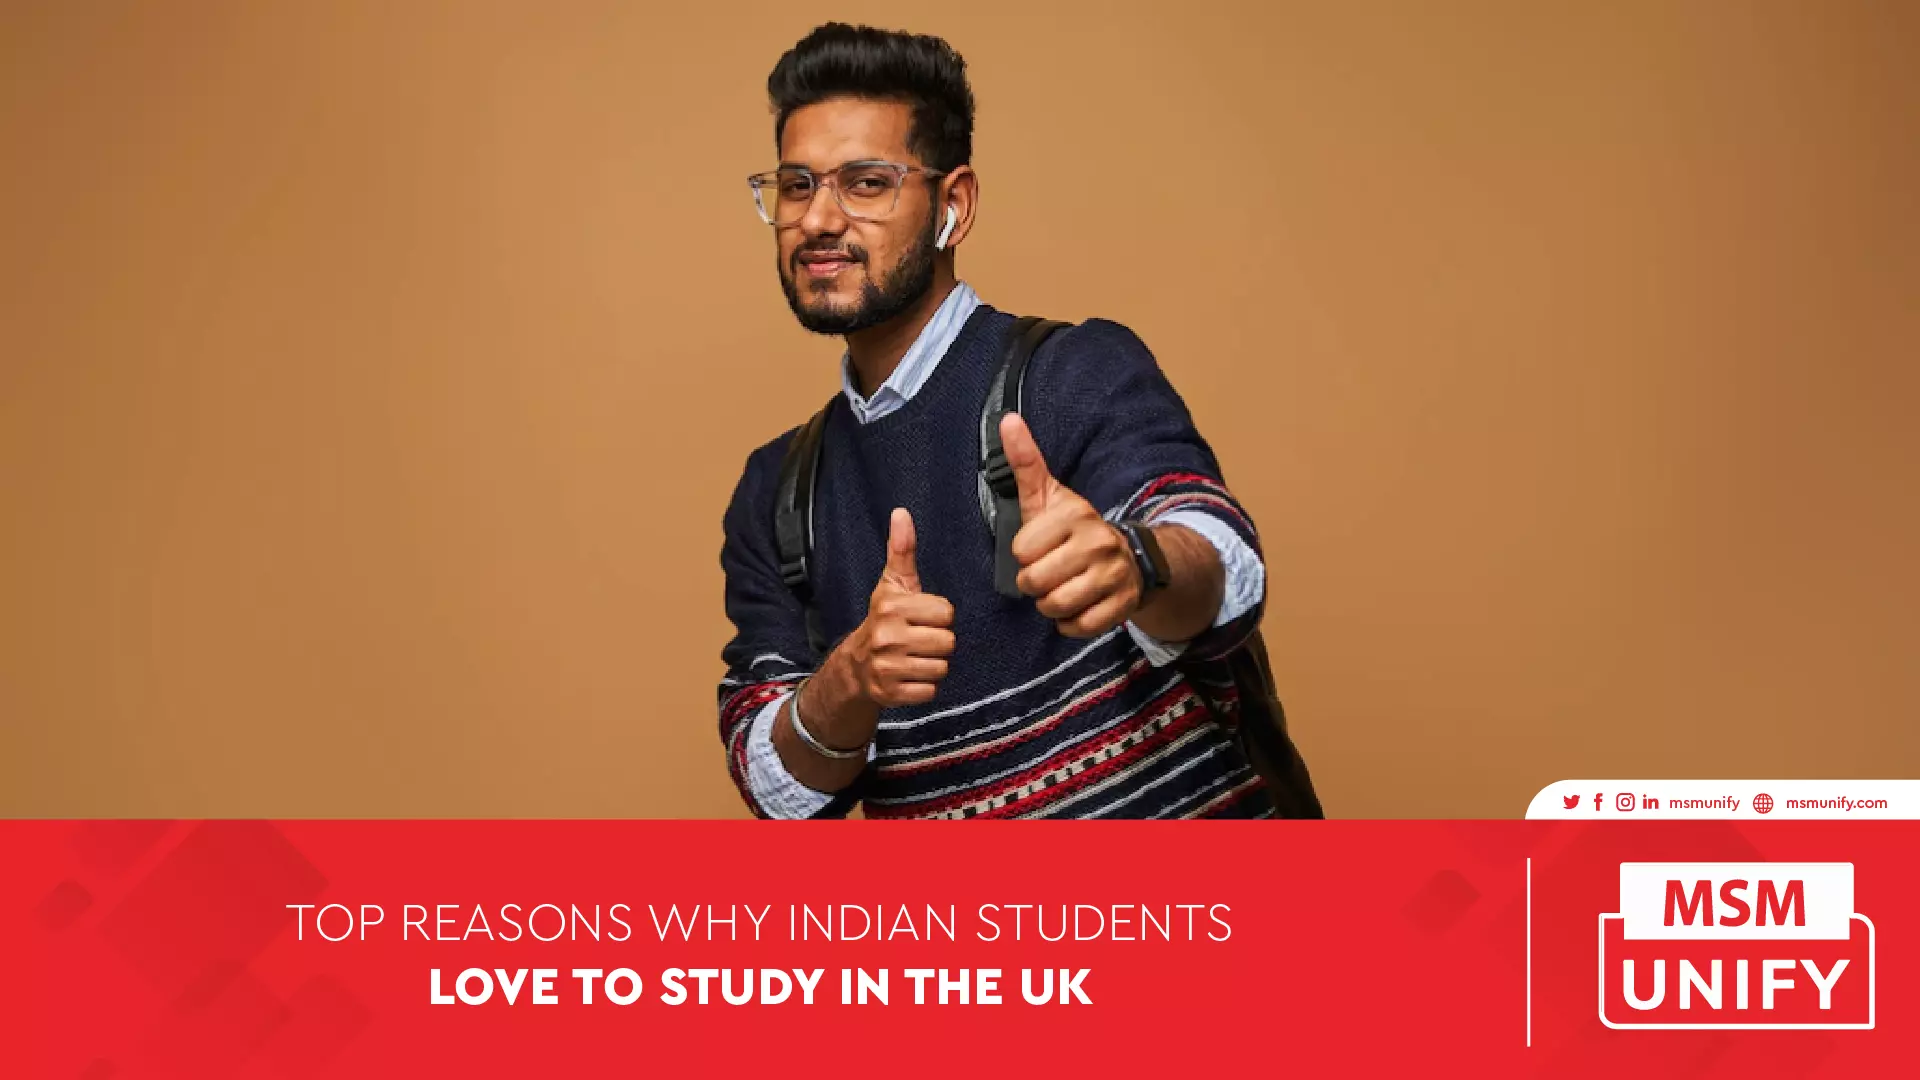 MSM Unify Students Love to Study in the UK